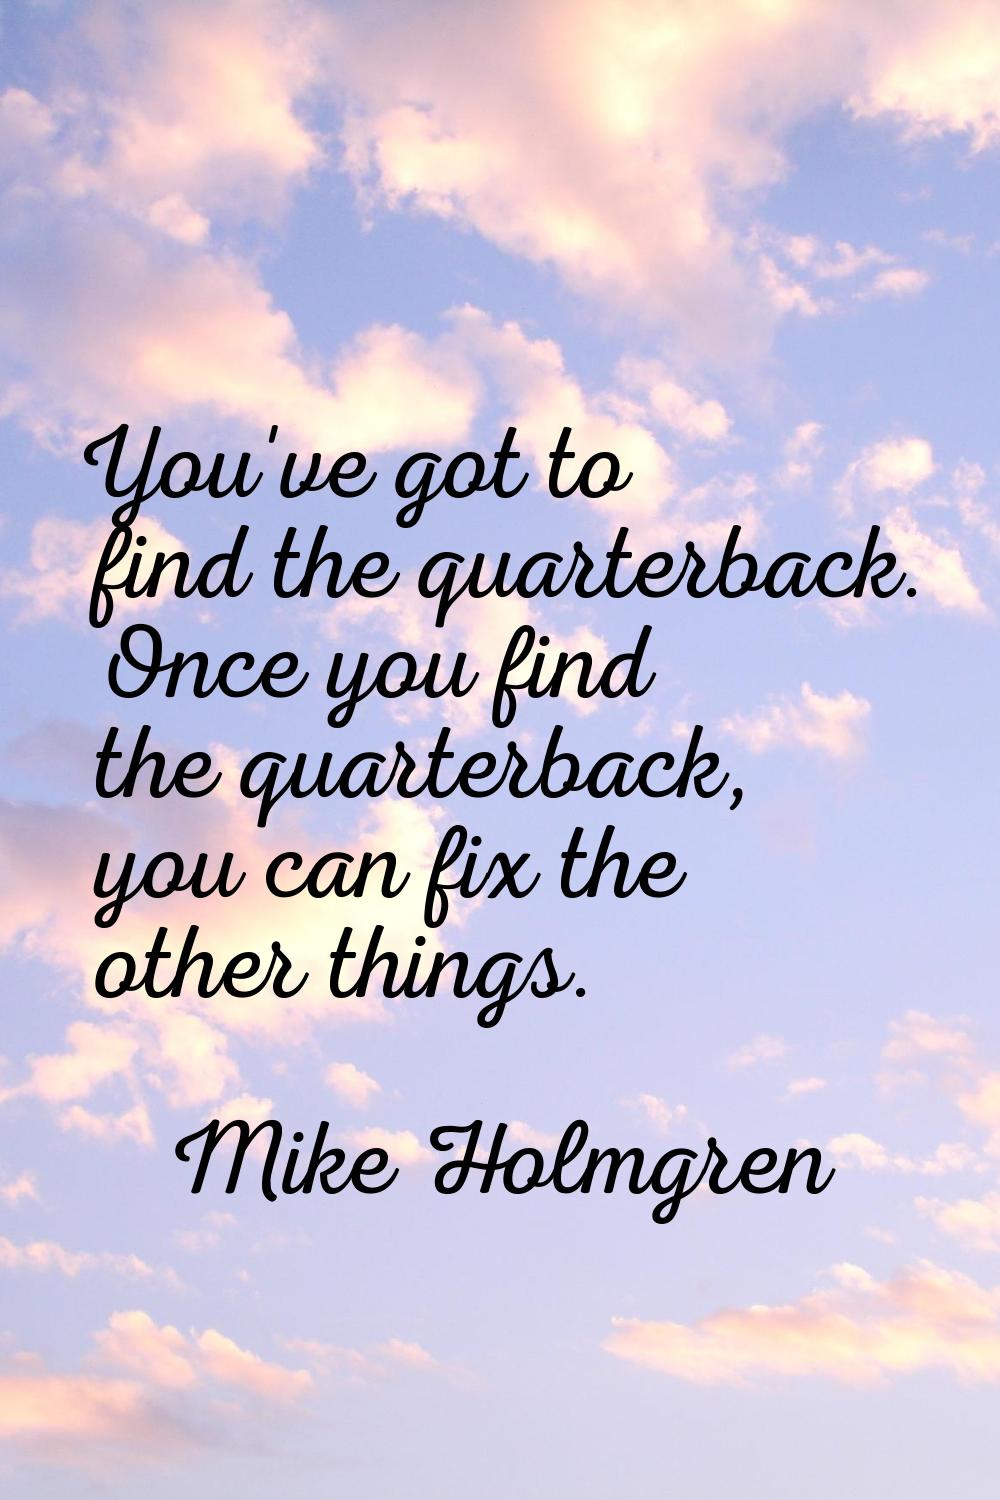 You've got to find the quarterback. Once you find the quarterback, you can fix the other things.